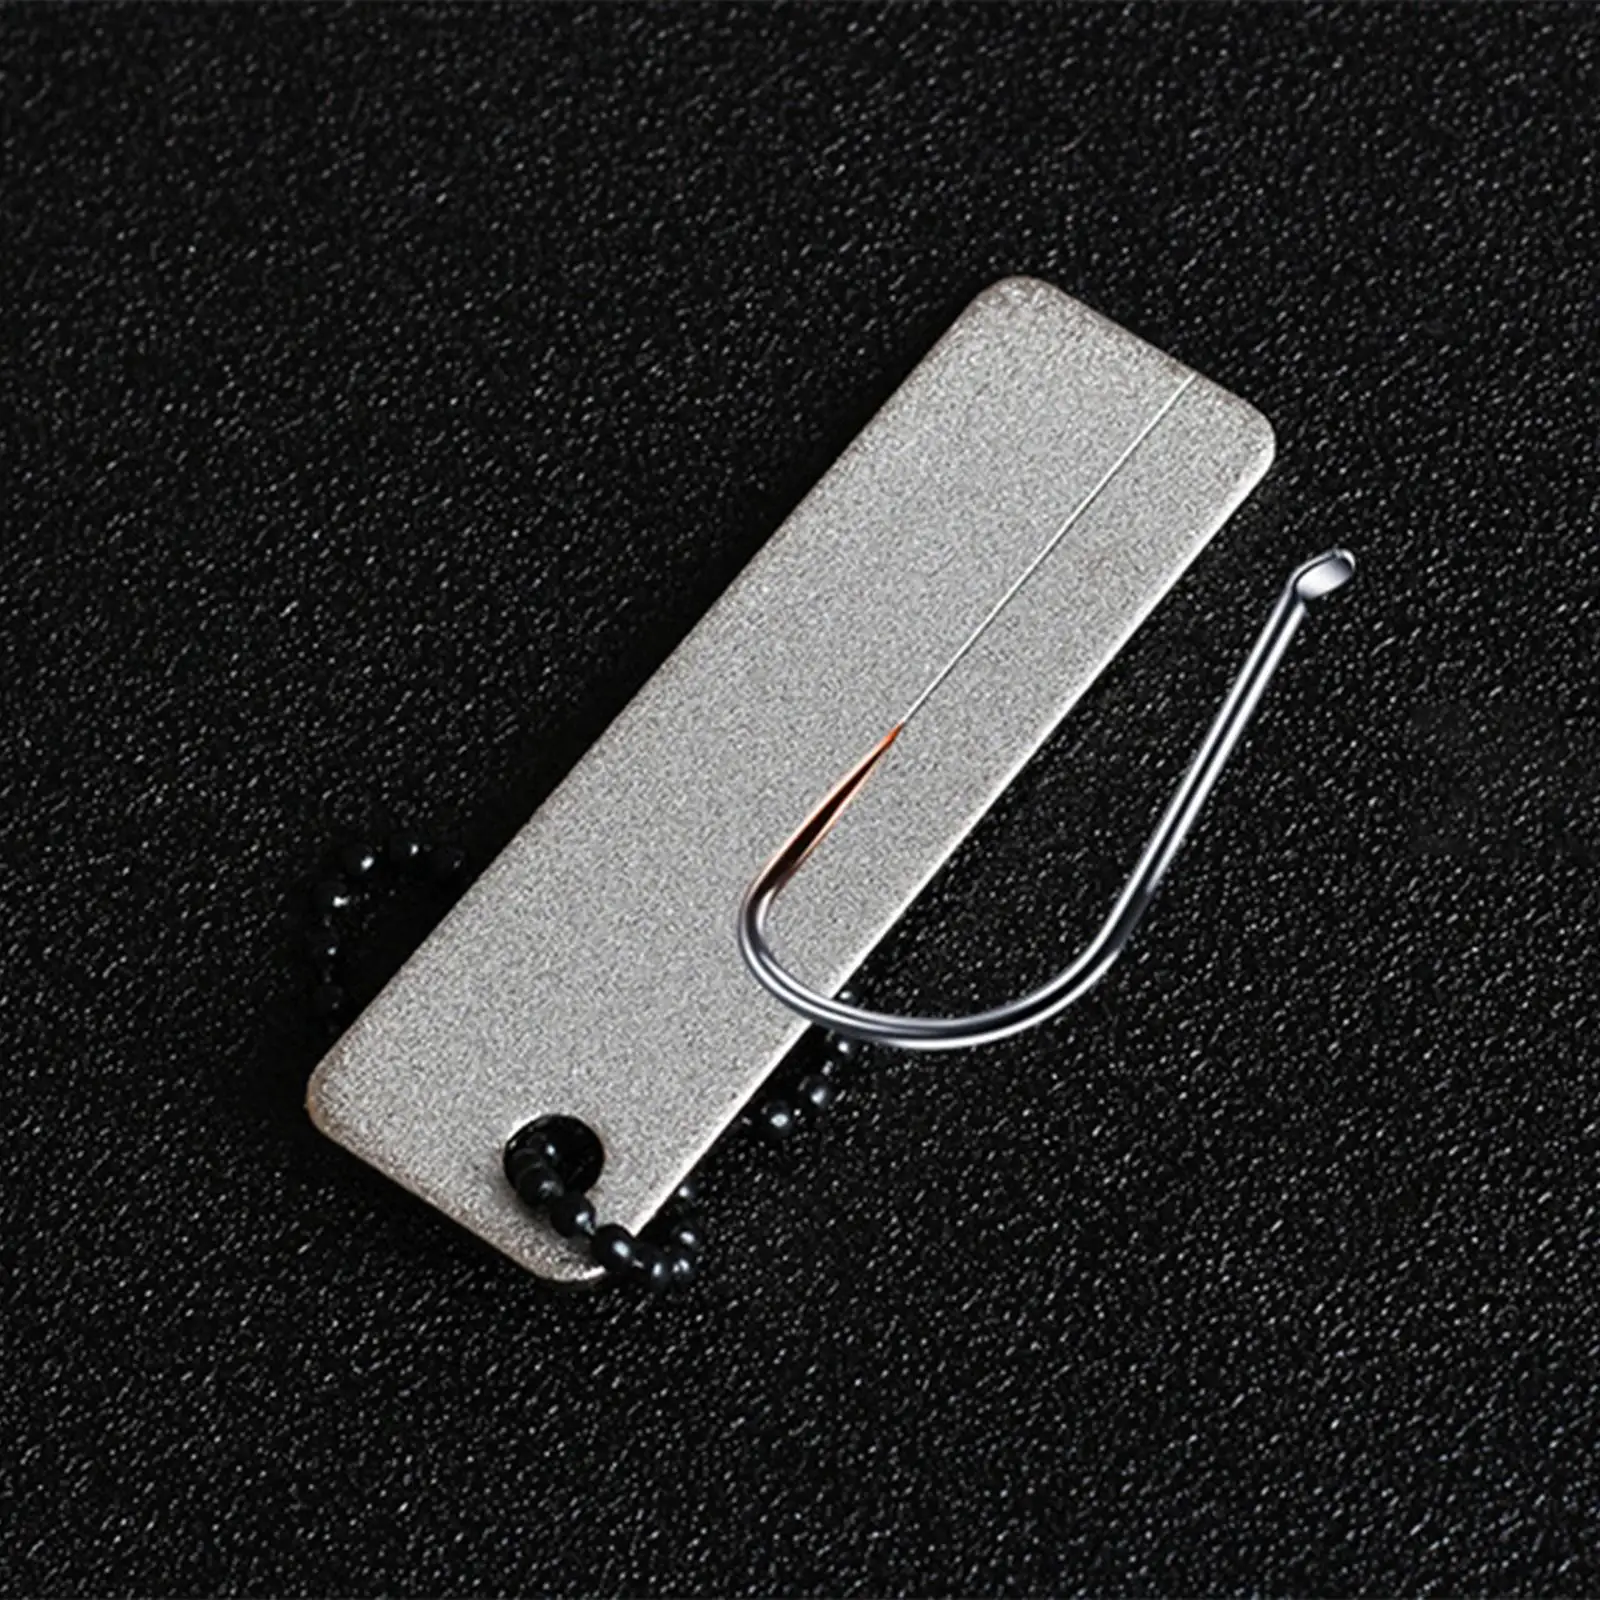 Outdoor stone Your Hooks Sharp Hook File Keychain pocket Hook File Multitool for